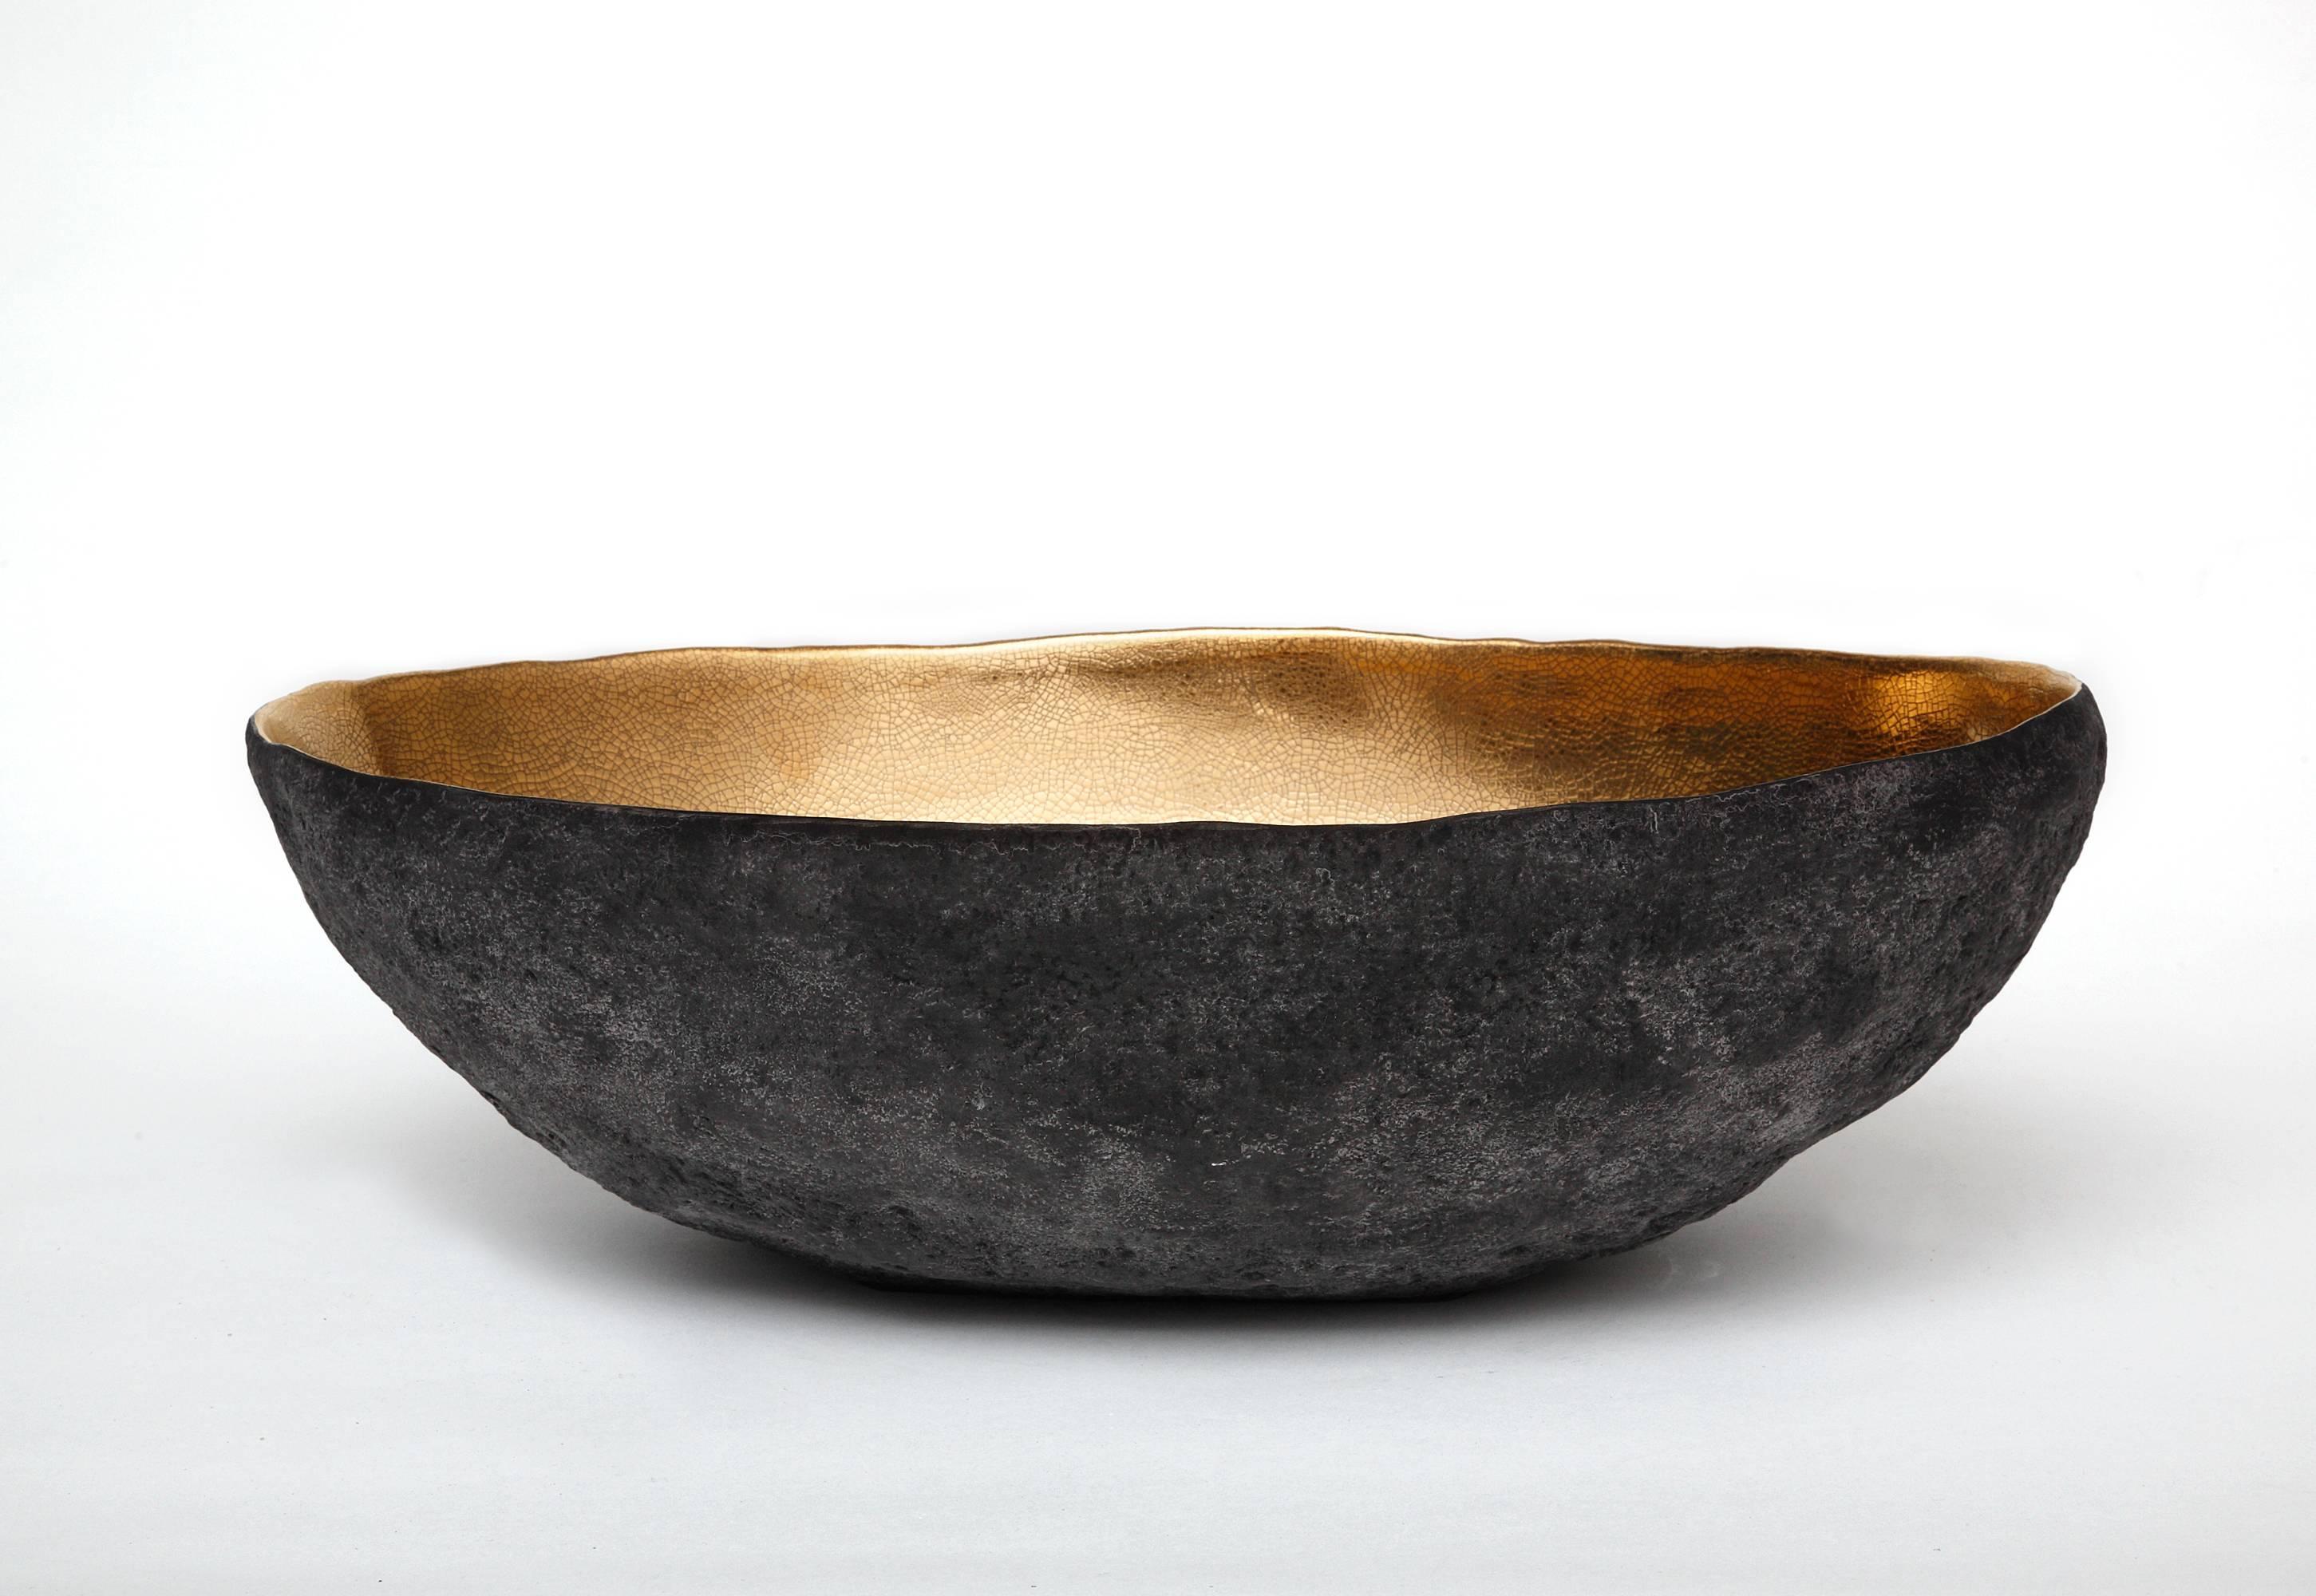 This vessel was created by Cristina Salusti. Beginning with a ball of clay, she pinches it into vessels and textures them with stone fragments. After multiple firing it was finally lustered with 22-karat gold. Its volcanic-like outer wall seem